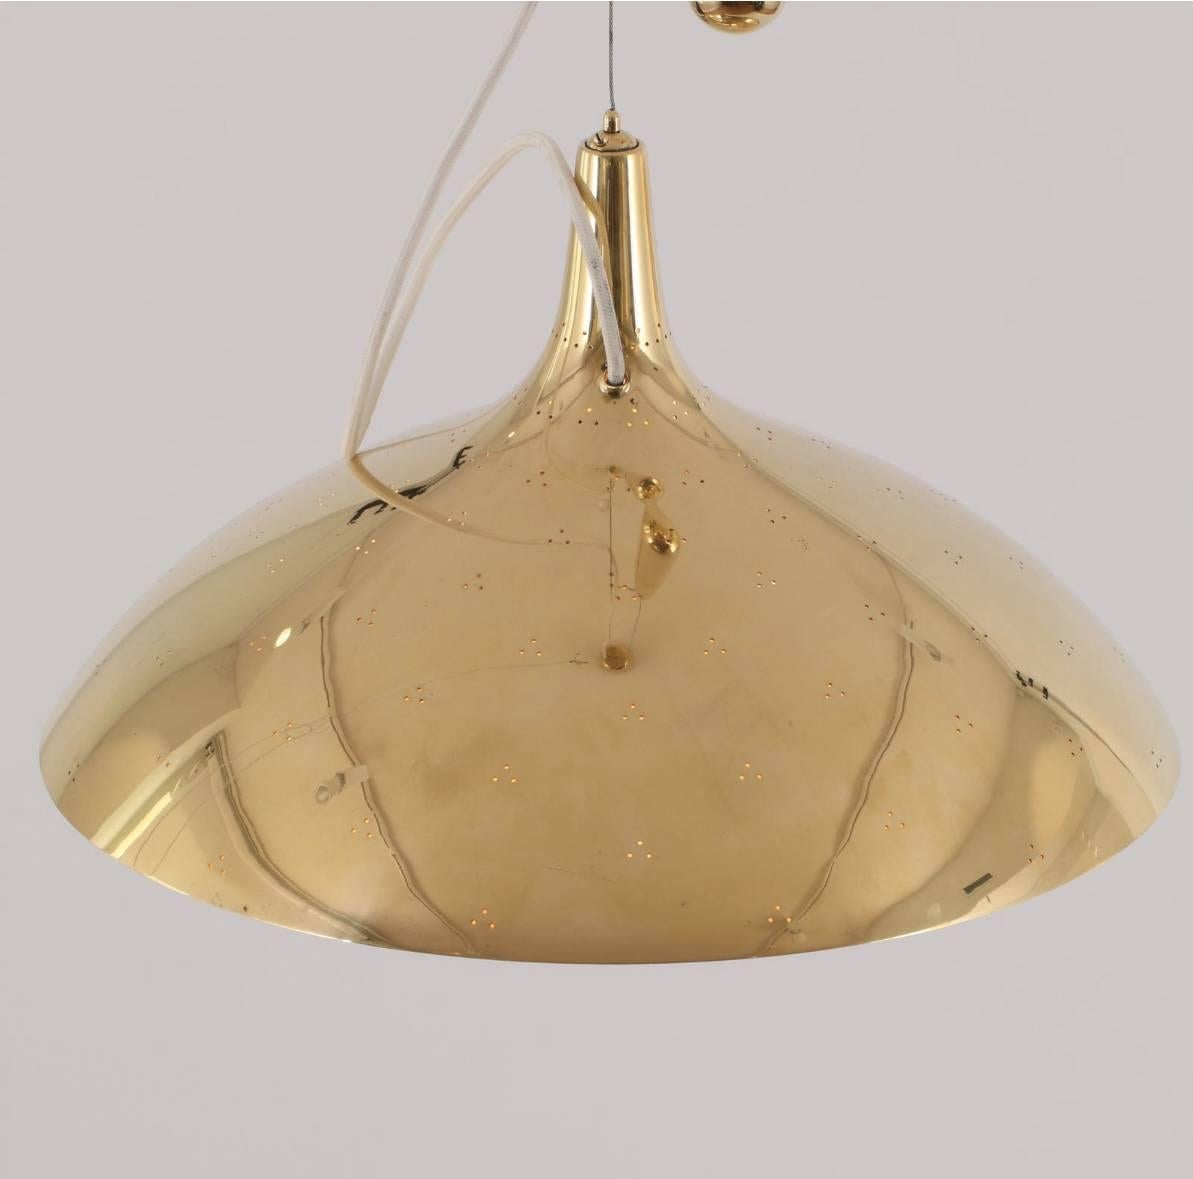 Finnish Paavo Tynell Brass Counter Weight Pendant Lamp A1965, Taito Oy, Finland, 1950s